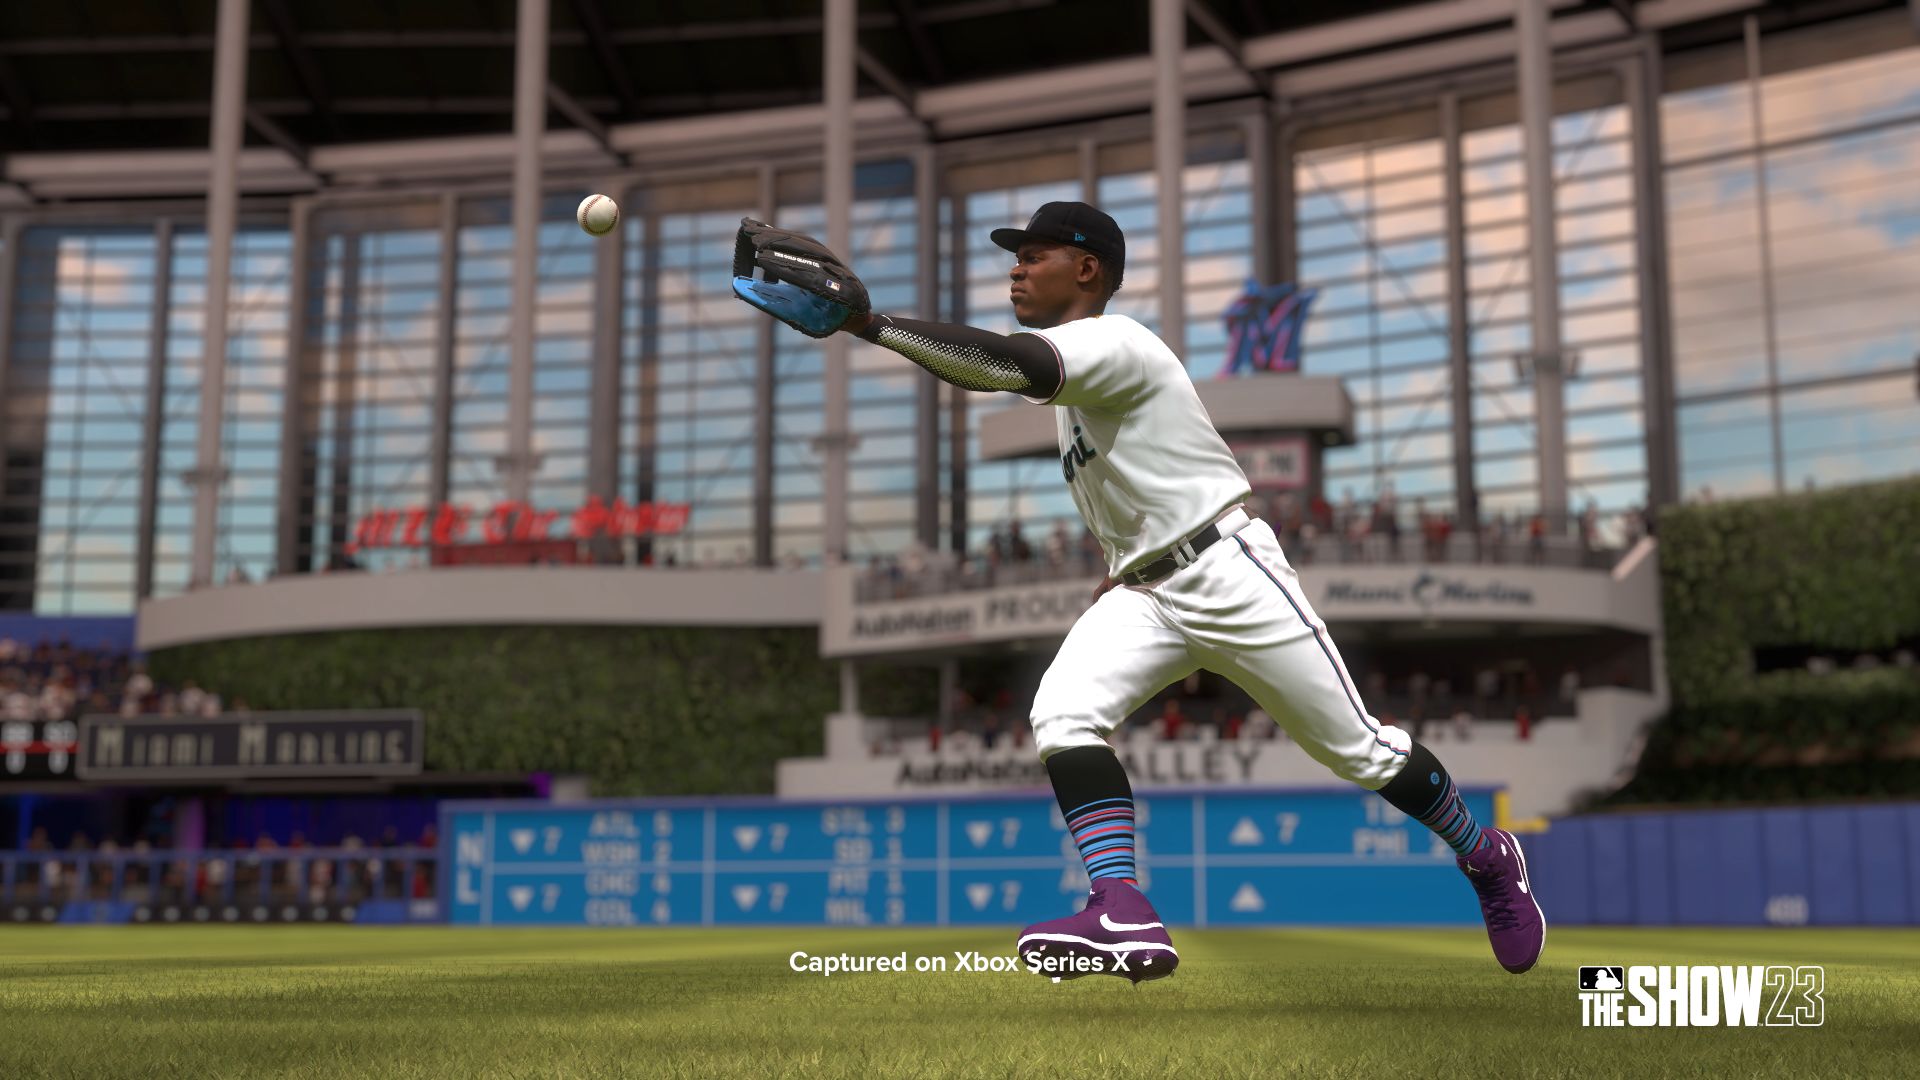 MLB The Show 23 is Bringing the Heat with Tons of New Updates and